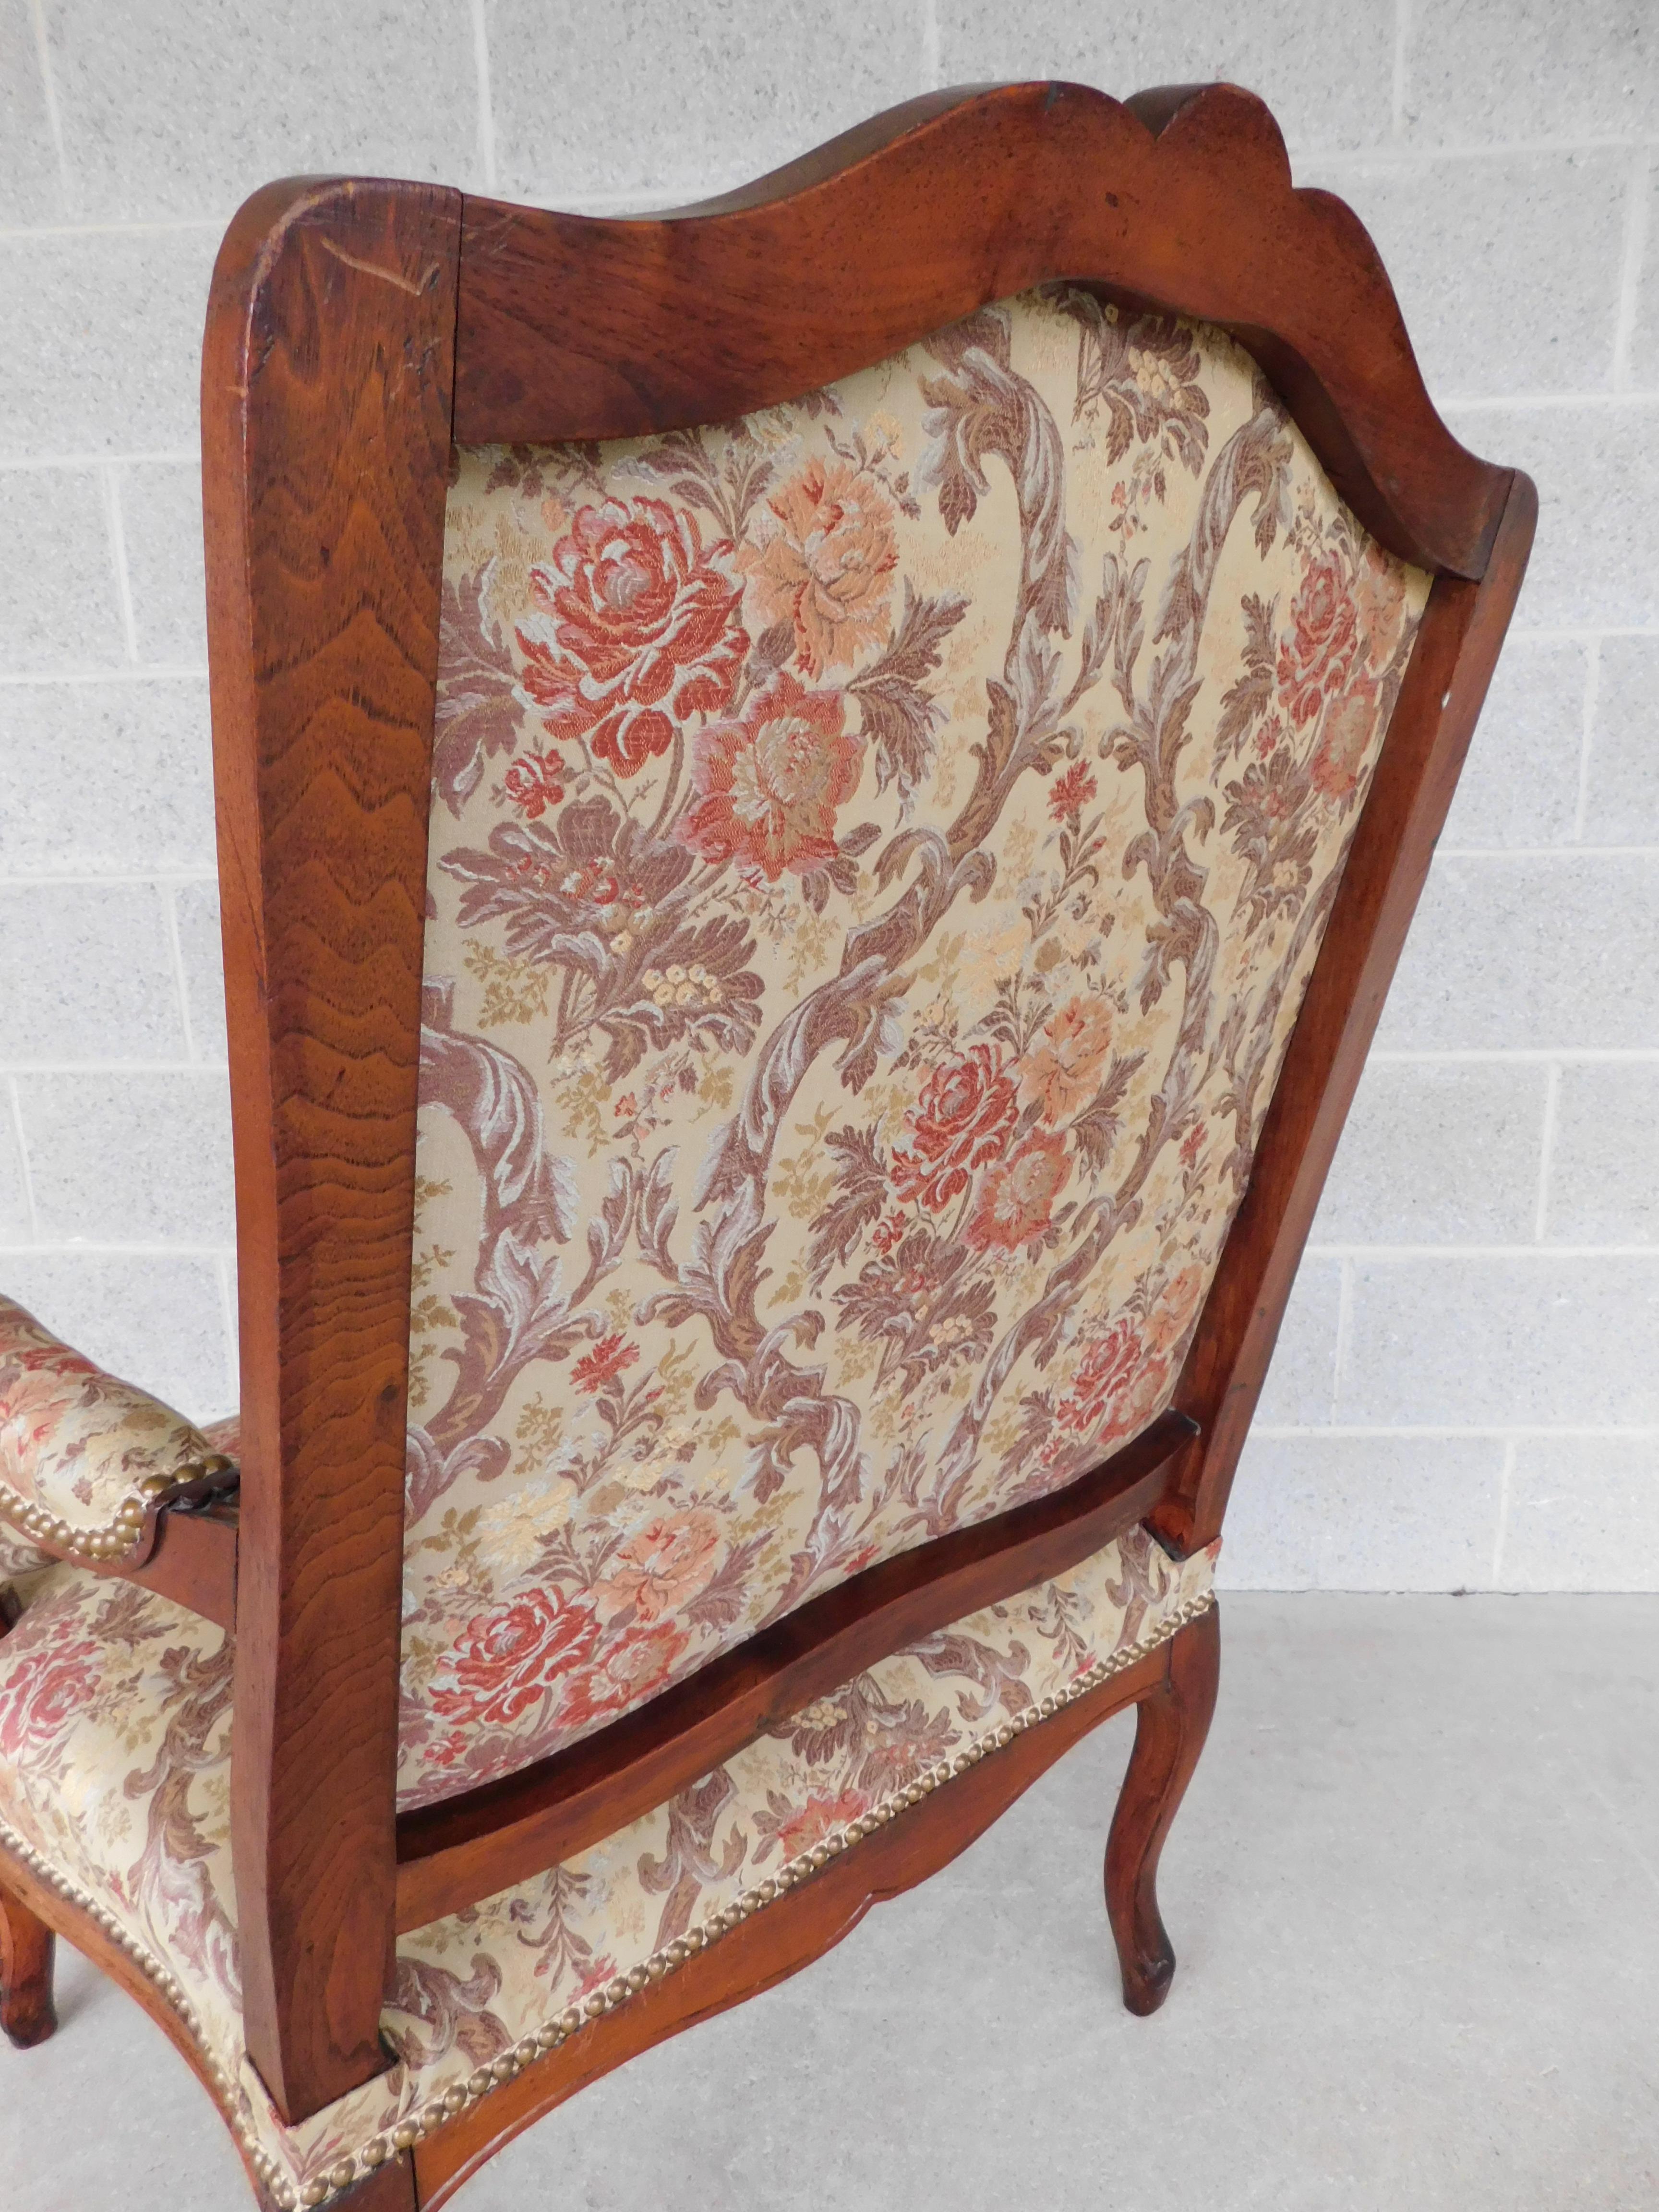 Vintage French Louis XV Style Fauteuil Chairs  - a Pair For Sale 7